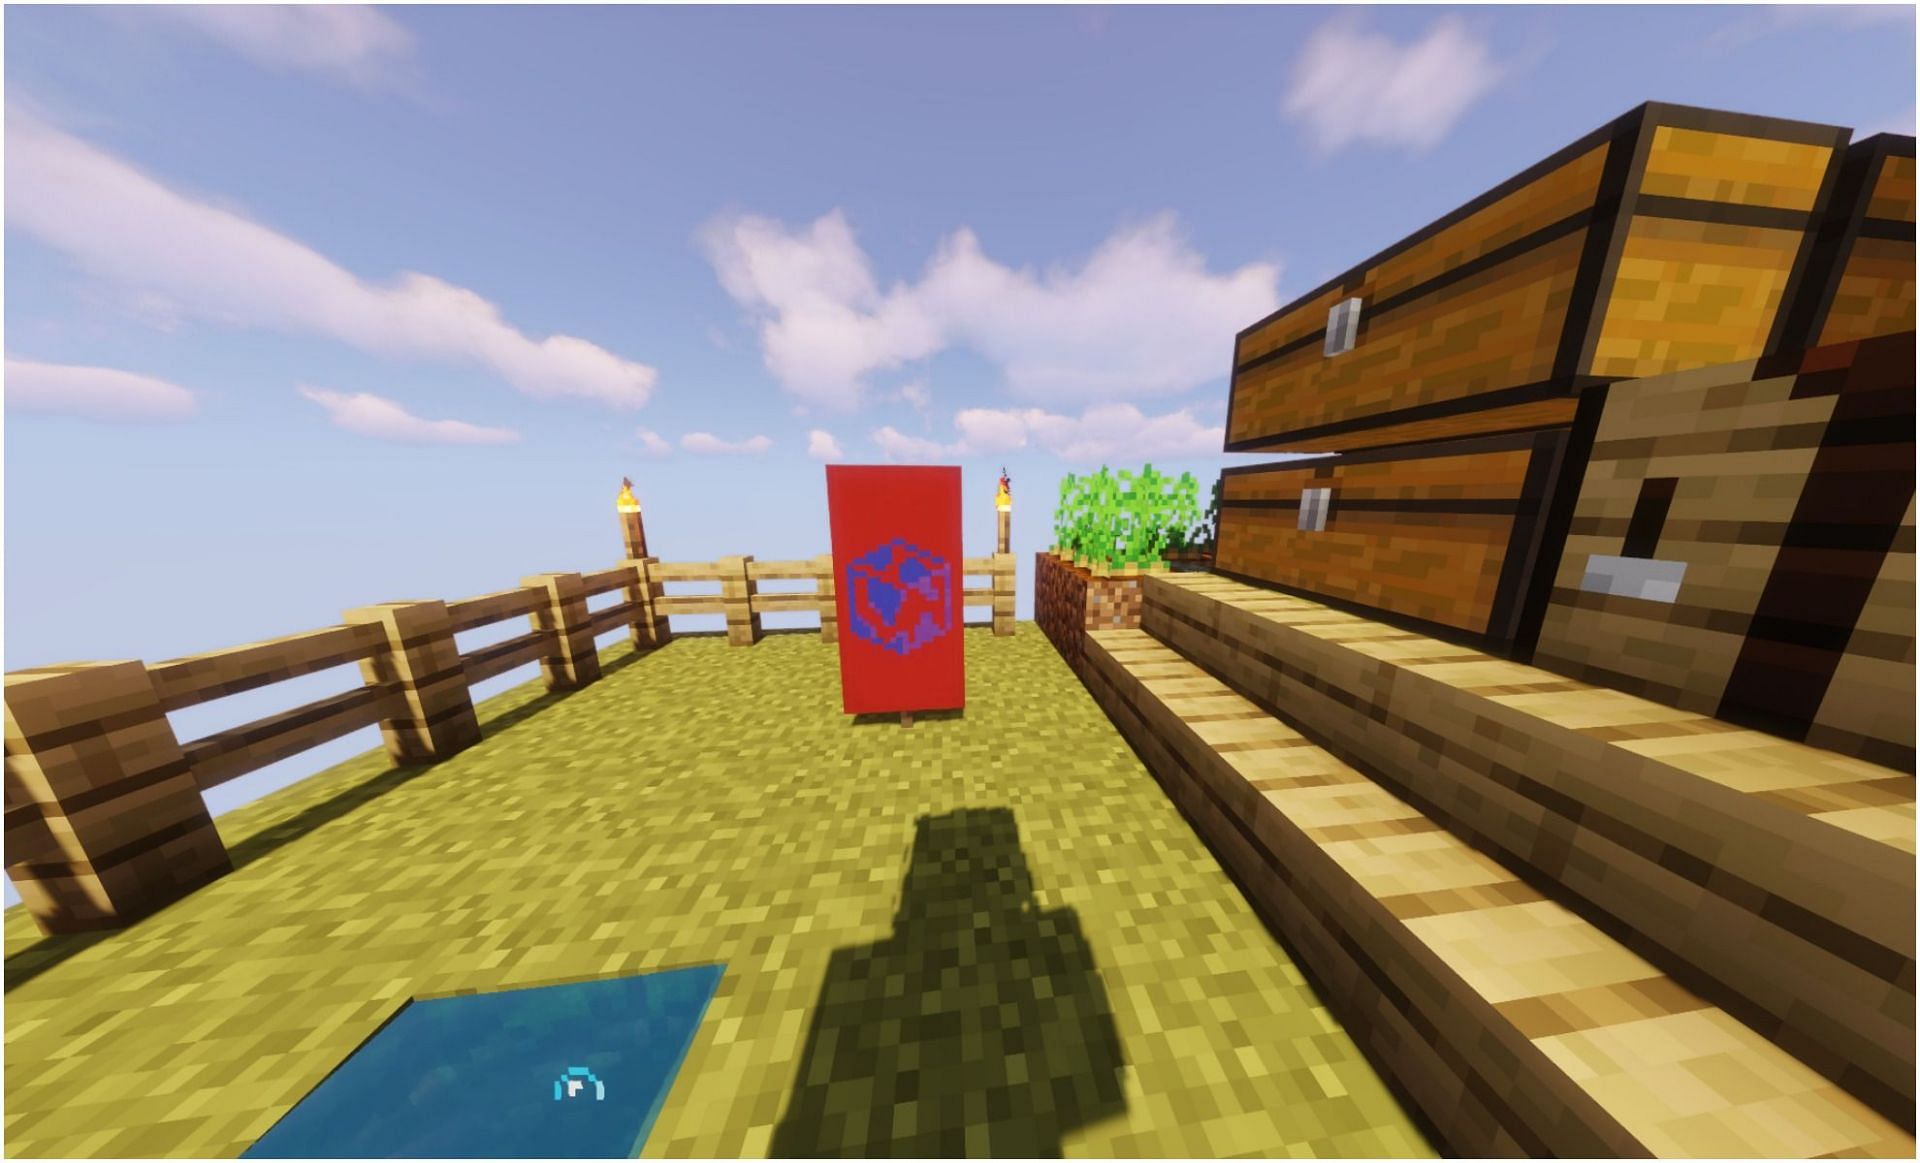 A custom banner depicts a Globe (Image via Minecraft)